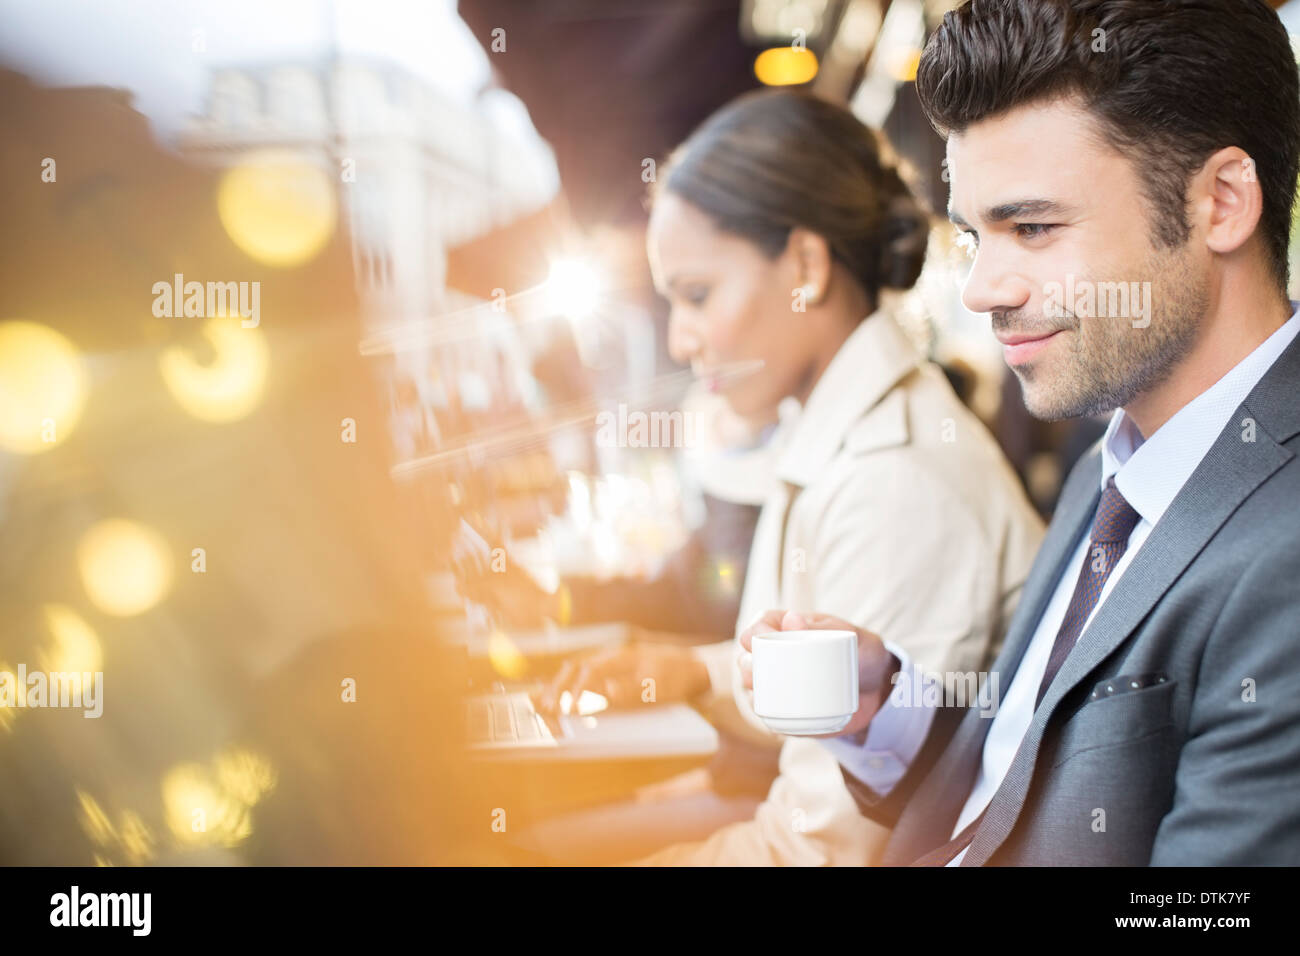 Business people working at sidewalk cafe Stock Photo